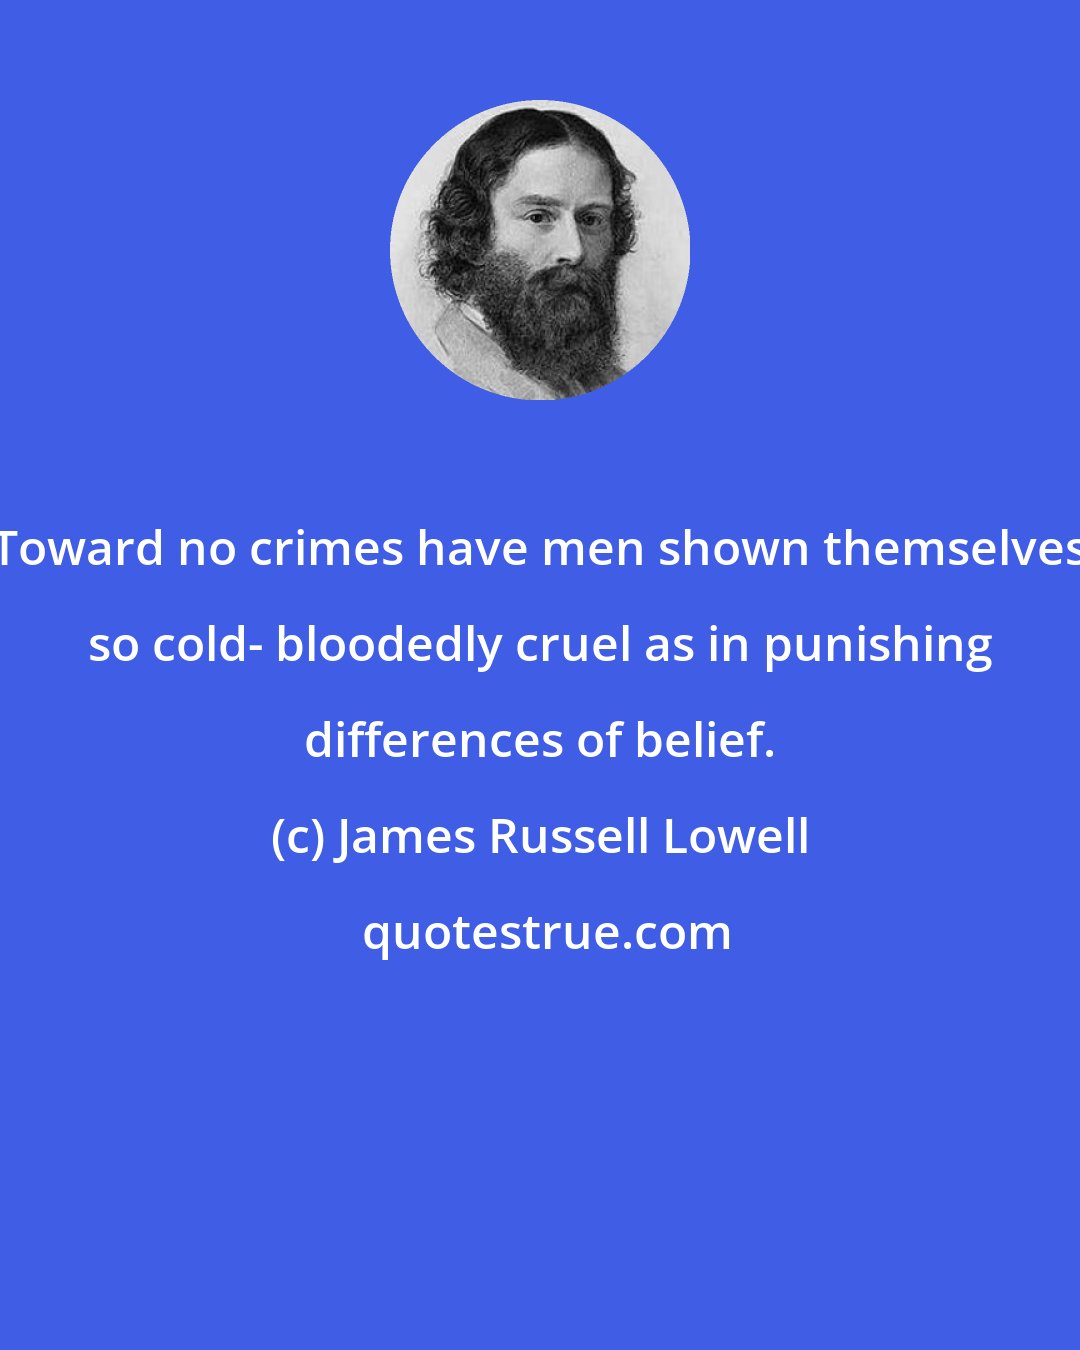 James Russell Lowell: Toward no crimes have men shown themselves so cold- bloodedly cruel as in punishing differences of belief.